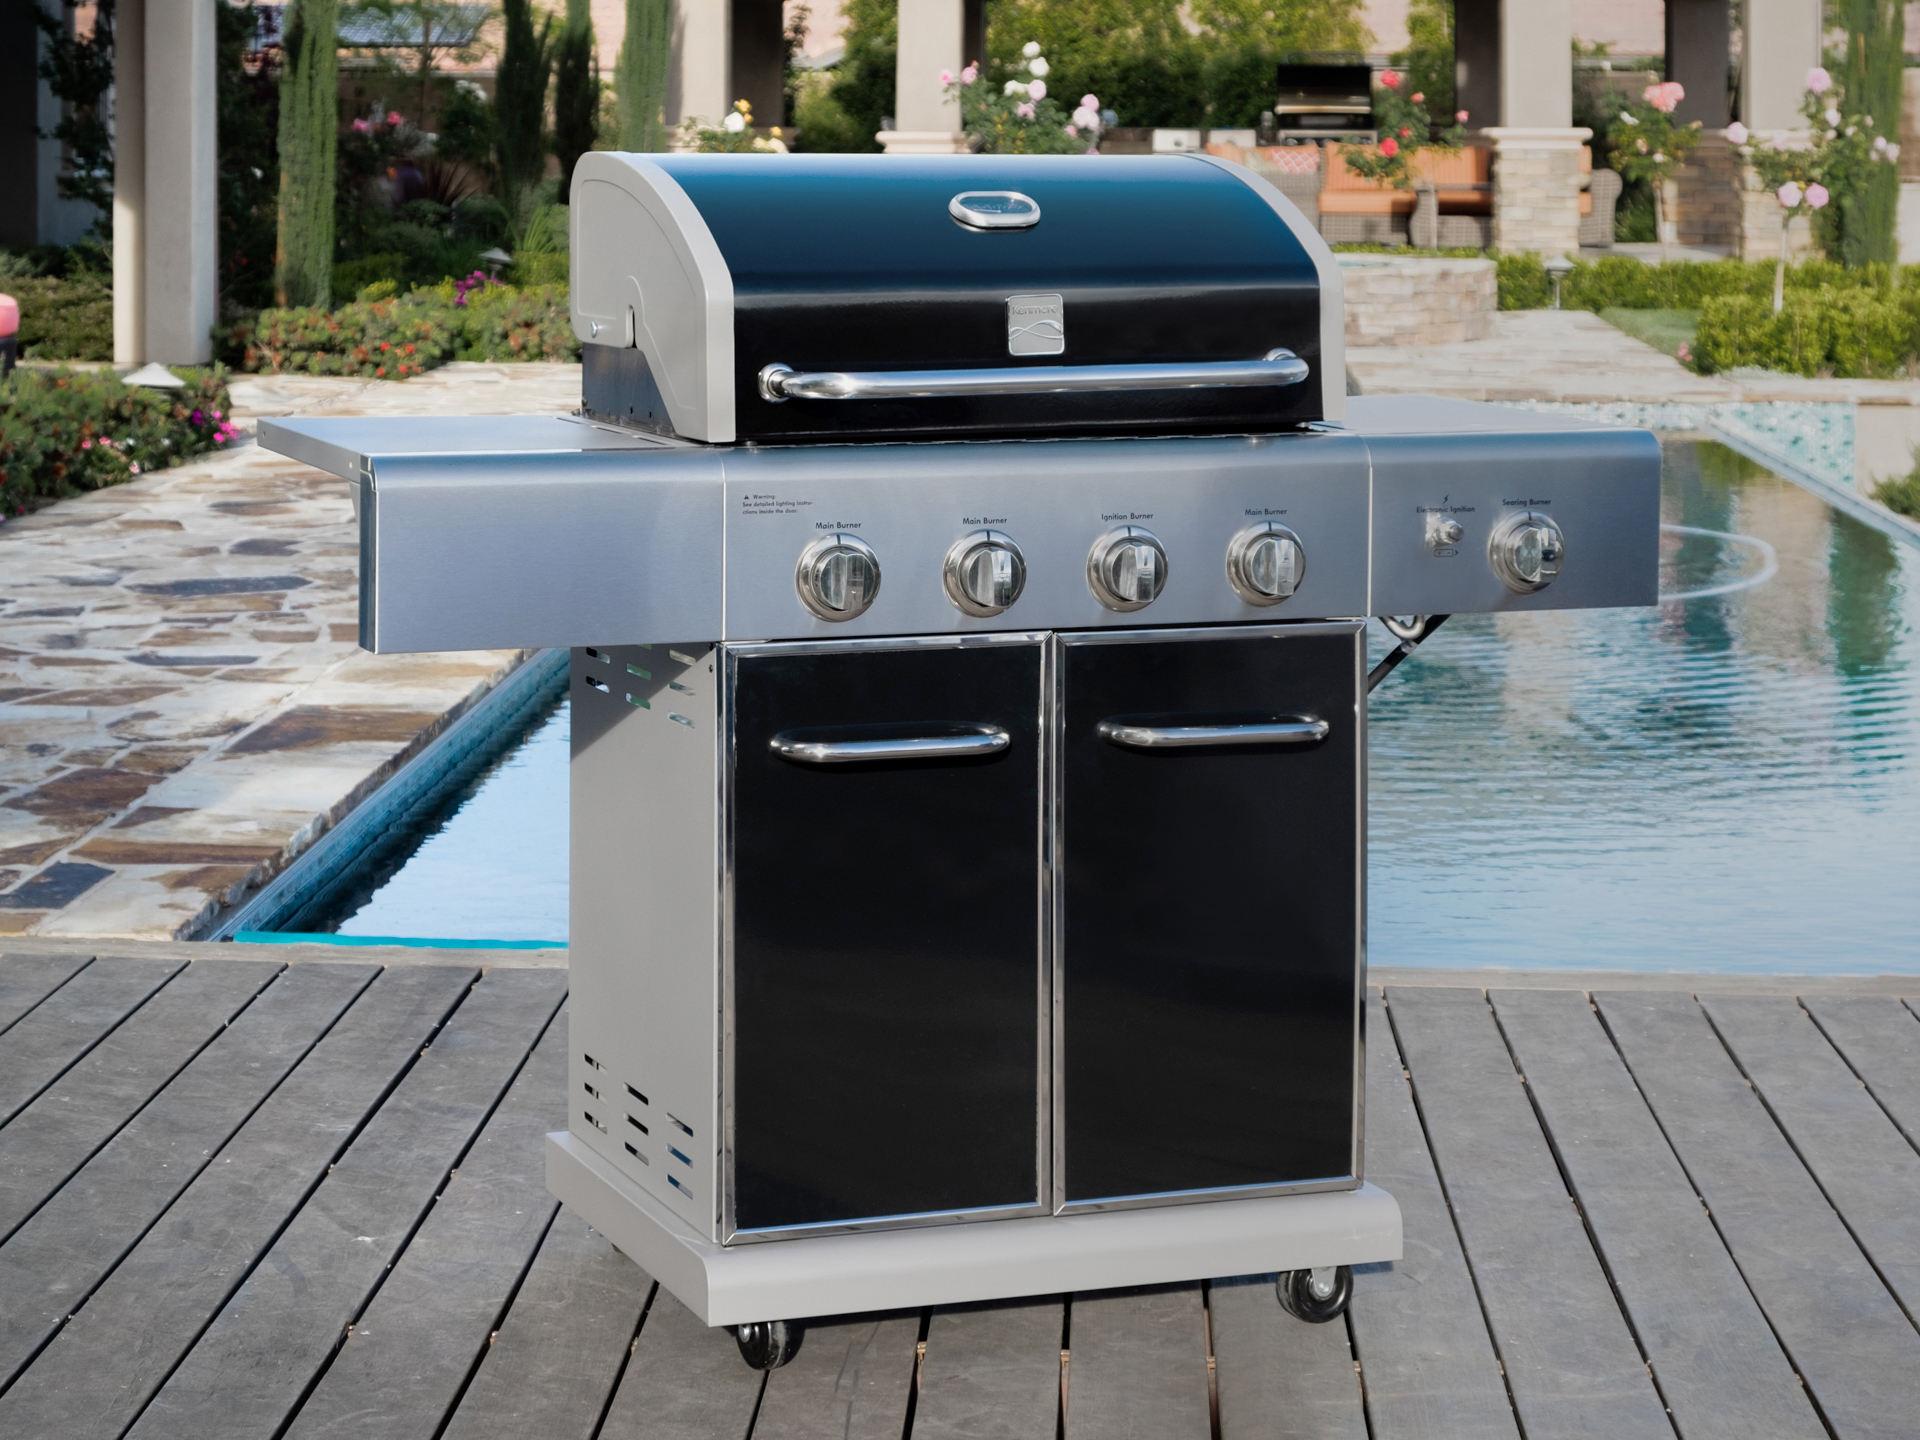 Kenmore 4-Burner Outdoor Propane Gas Grill with Searing Side Burner, Stainless Steel with Black Trim - image 4 of 8